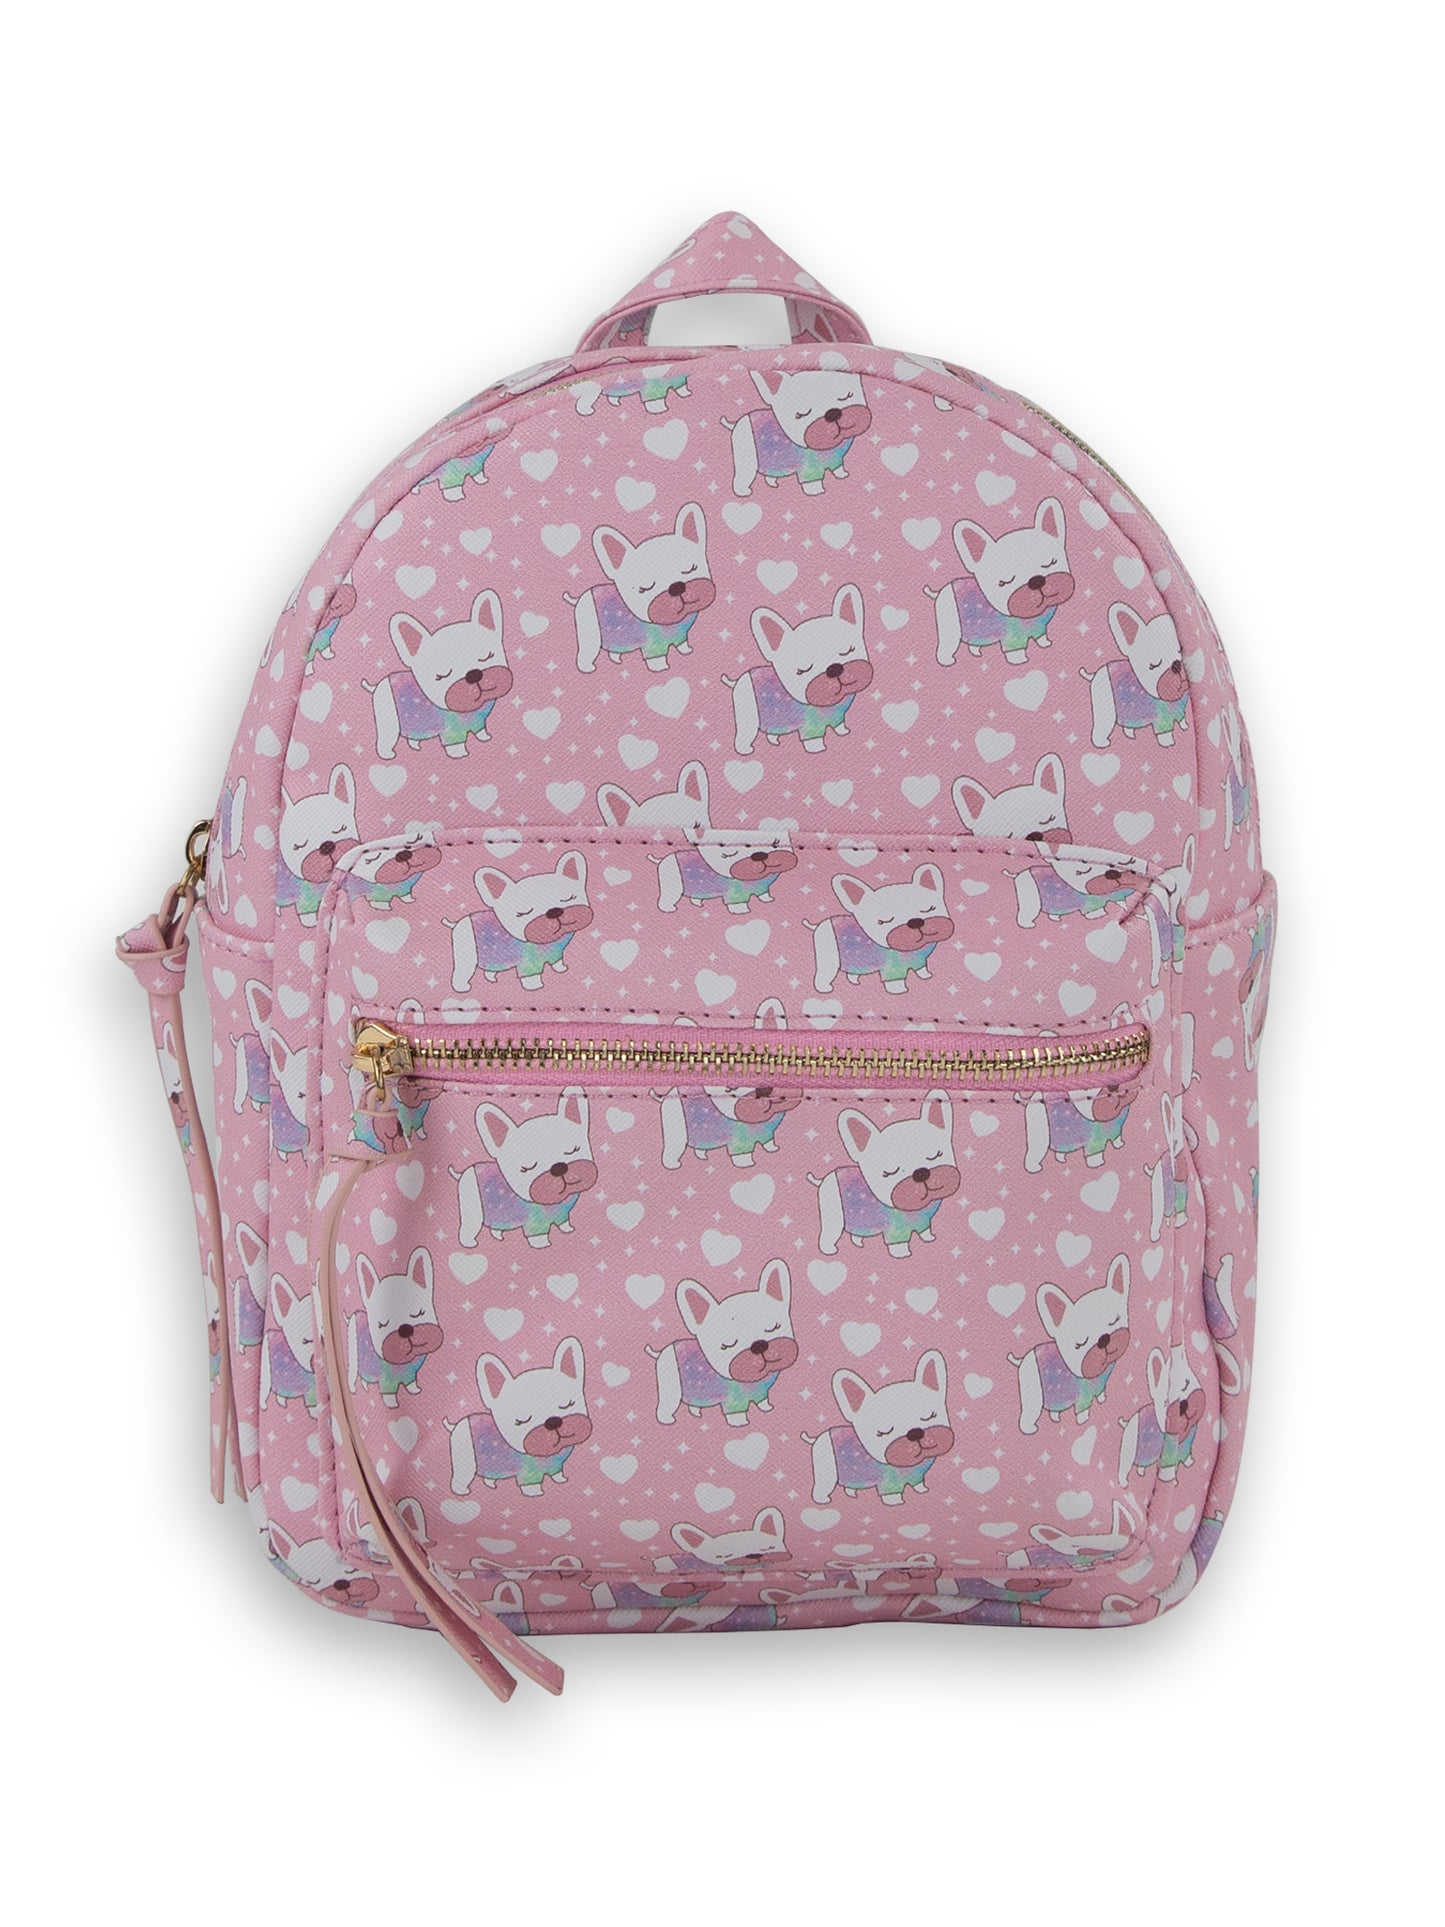 Under One Sky Pink & Black Print Four Zipper Compartments Backpack Purse